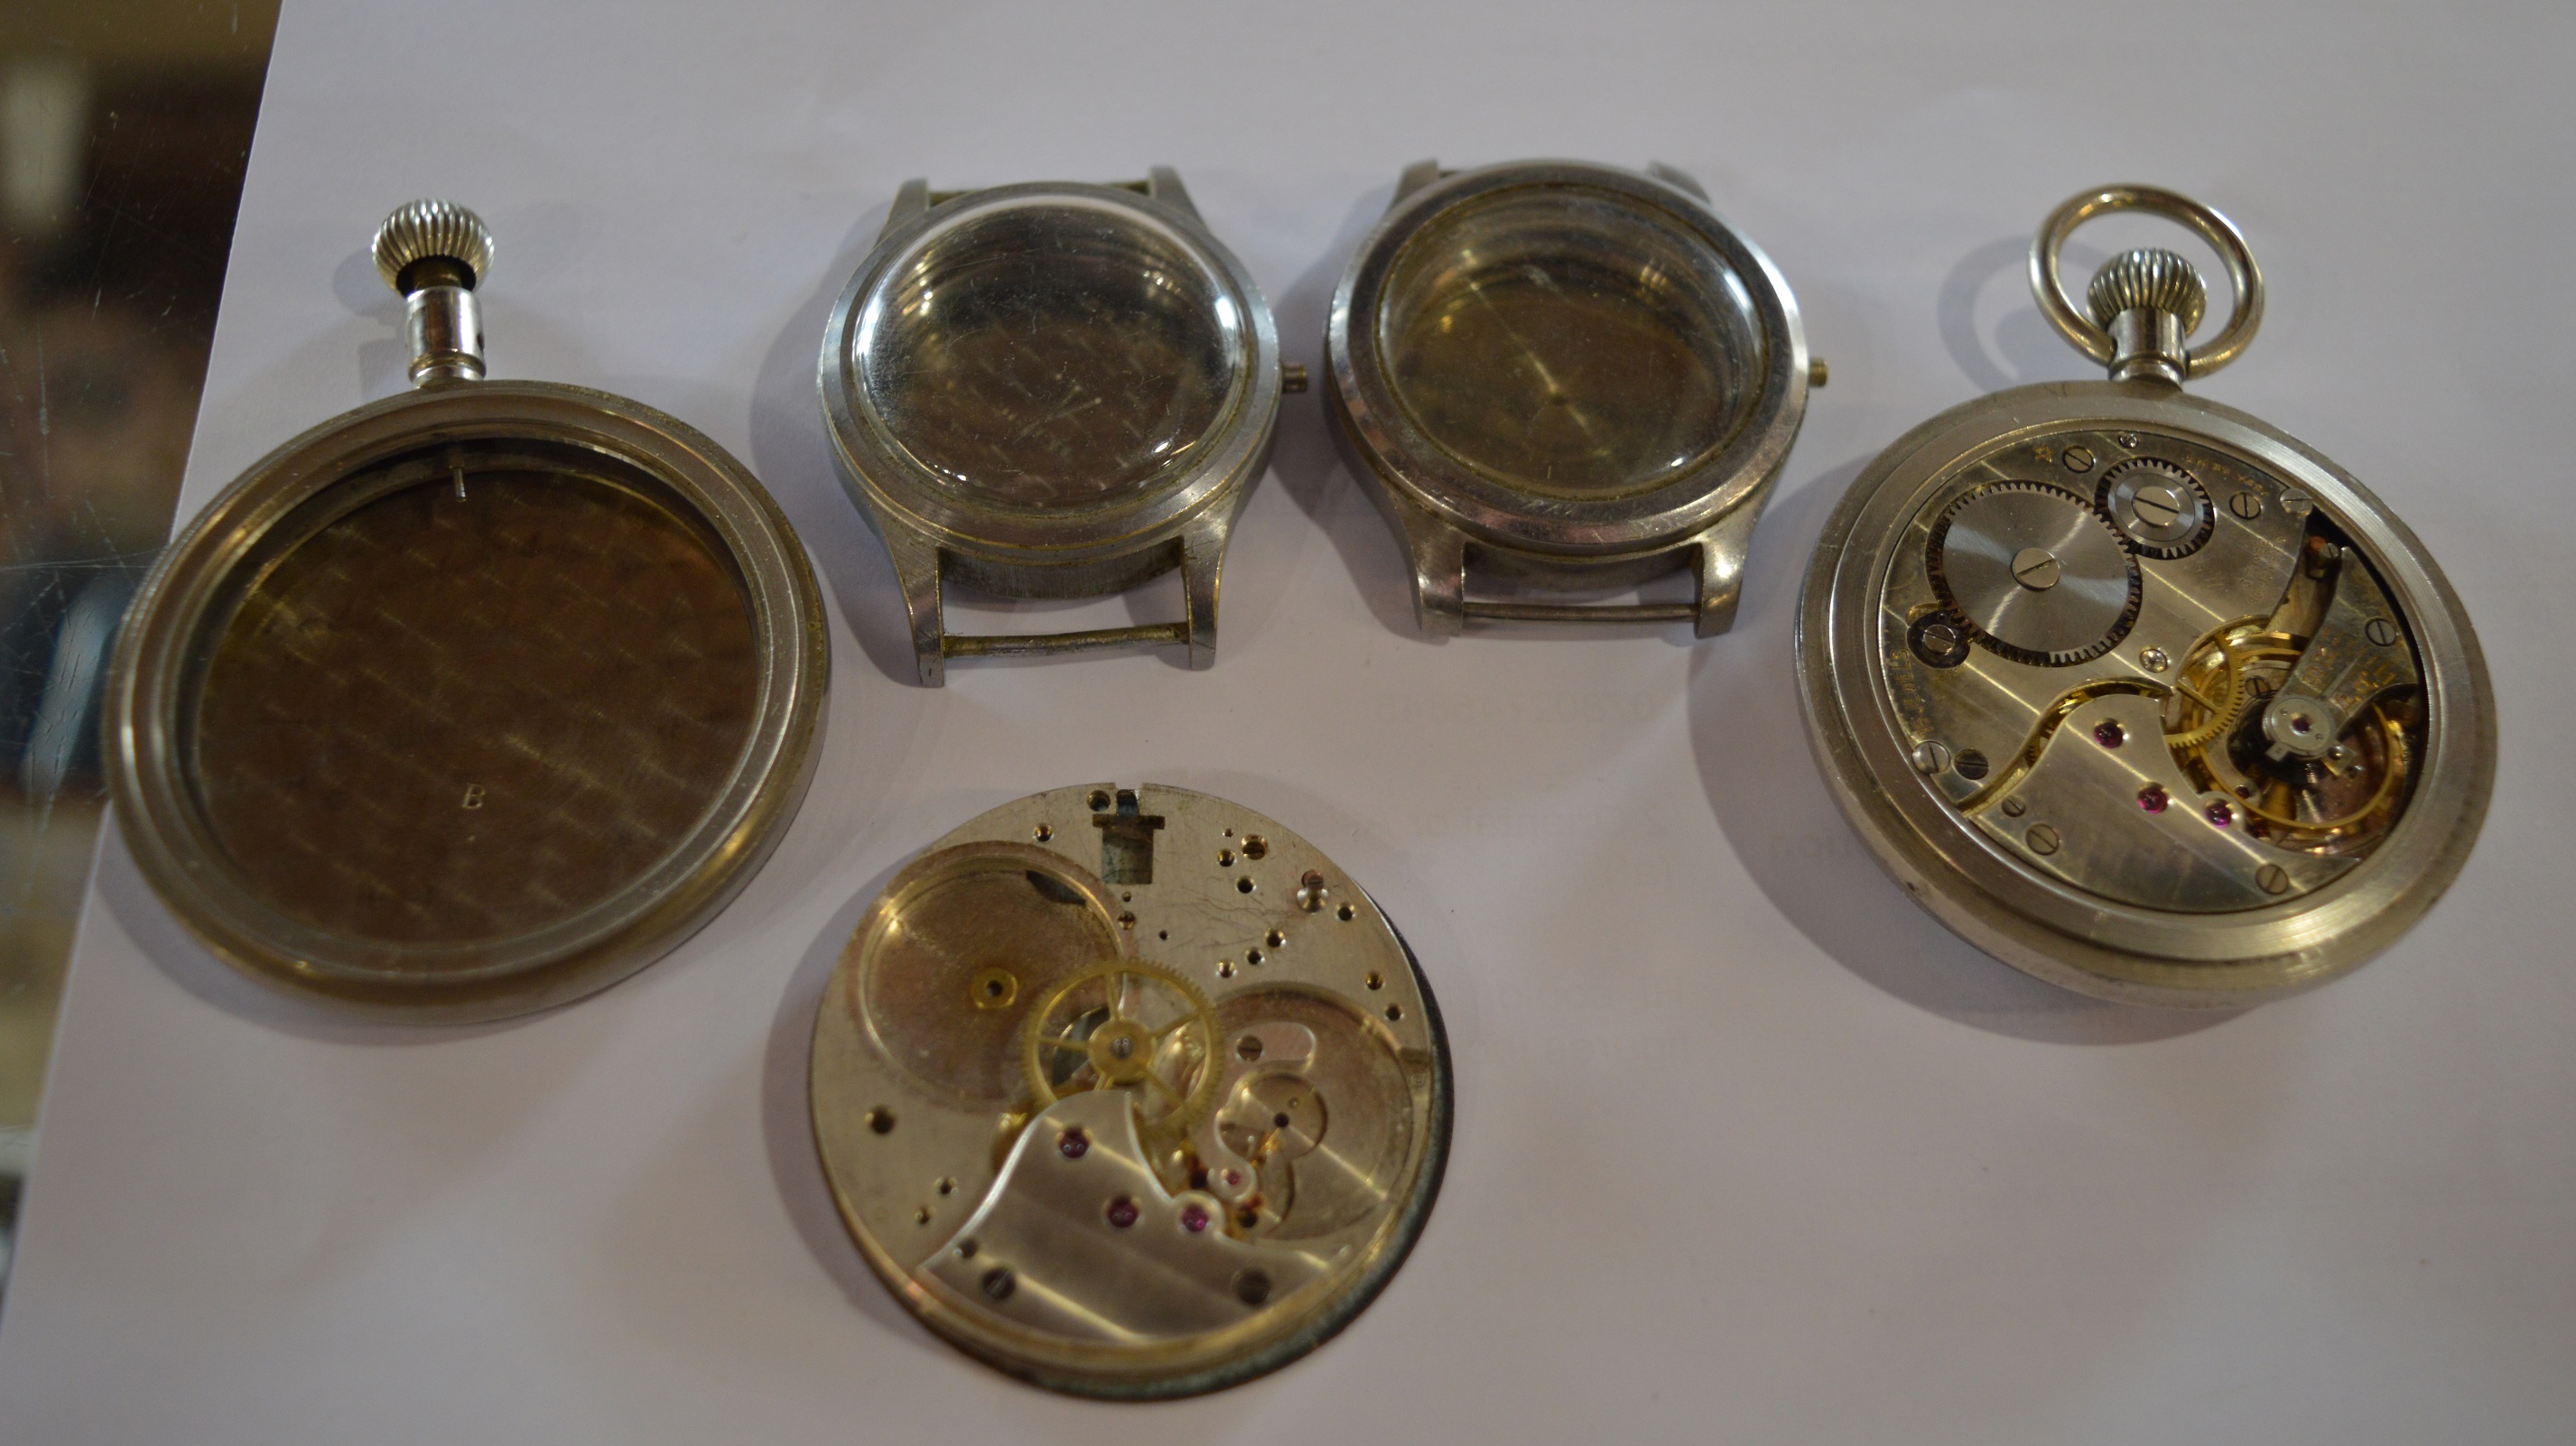 2 military pocket watches and 2 watch cases with military broad arrow & 'WWW' marks (Possibly Dirty - Image 2 of 6